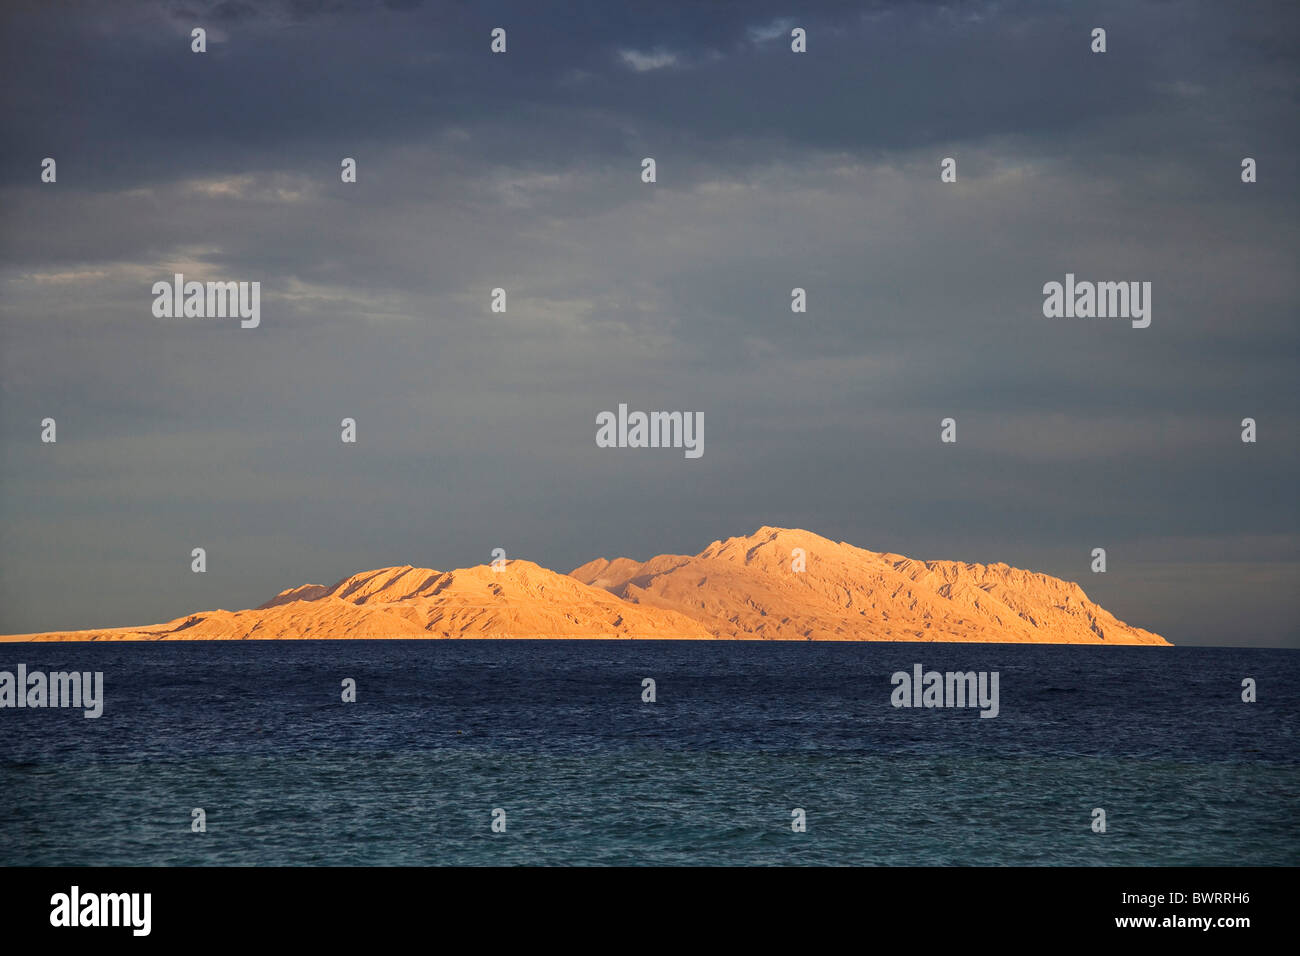 Evening mood at the Red Sea, Sharm el Sheikh, Egypt, Africa Stock Photo